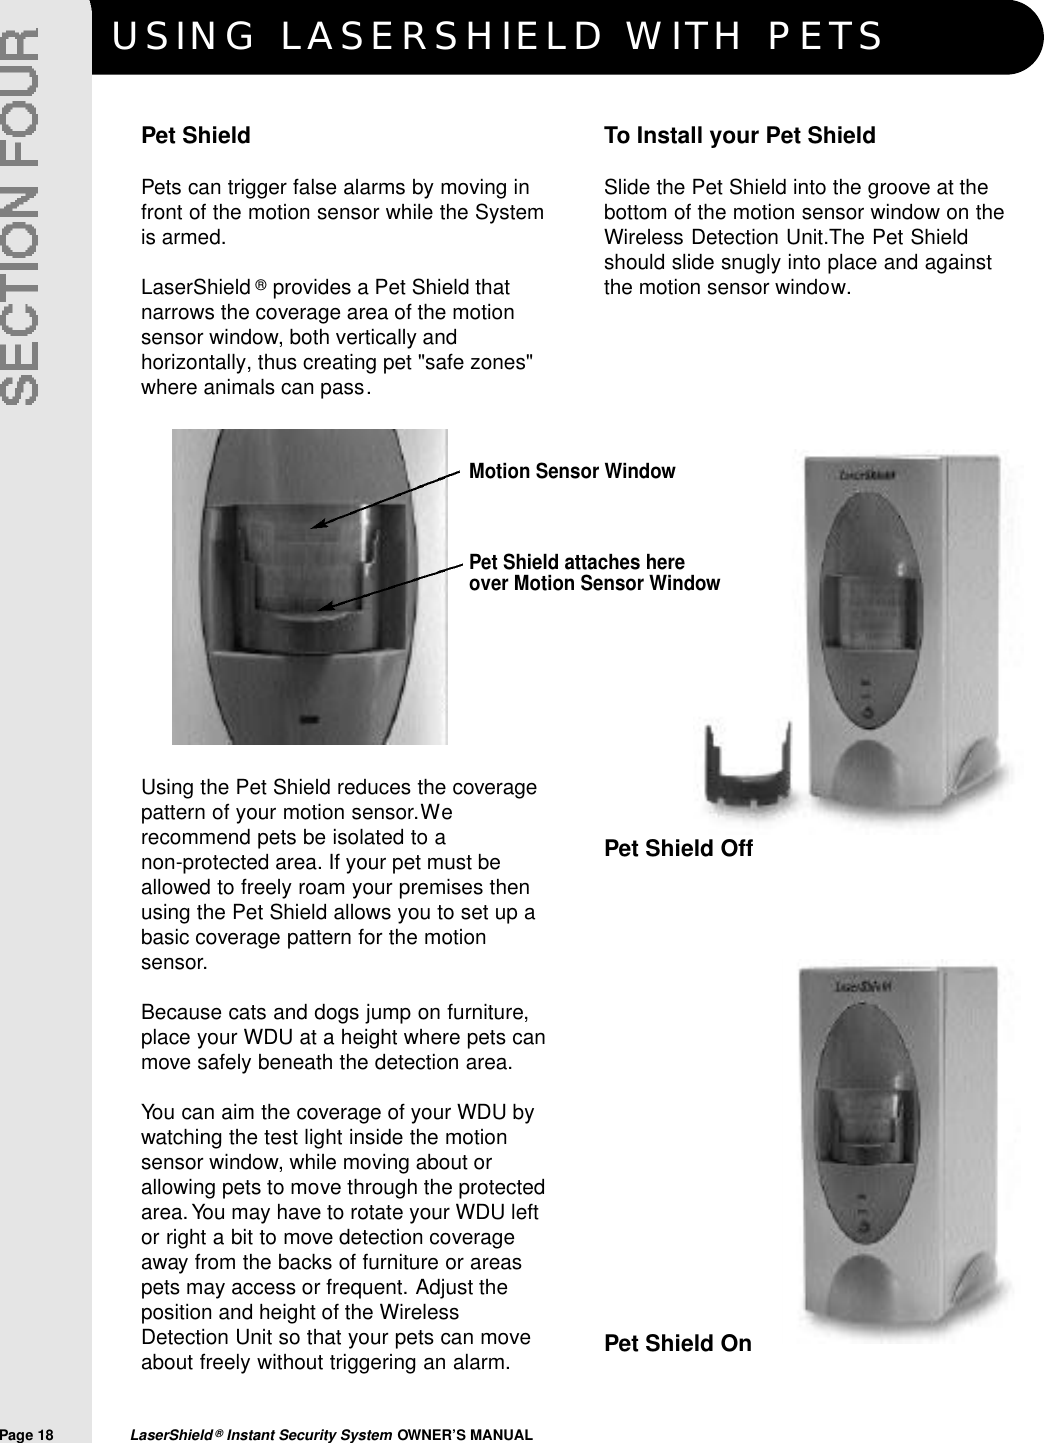 USING LASERSHIELD WITH PETSPage 18  LaserShield ®Instant Security System OWNER’S MANUALPet ShieldPets can trigger false alarms by moving infront of the motion sensor while the Systemis armed.LaserShield ®provides a Pet Shield thatnarrows the coverage area of the motionsensor window, both vertically andhorizontally, thus creating pet &quot;safe zones&quot;where animals can pass.Using the Pet Shield reduces the coveragepattern of your motion sensor.Werecommend pets be isolated to a non-protected area. If your pet must beallowed to freely roam your premises thenusing the Pet Shield allows you to set up abasic coverage pattern for the motionsensor.Because cats and dogs jump on furniture,place your WDU at a height where pets canmove safely beneath the detection area.You can aim the coverage of your WDU bywatching the test light inside the motionsensor window, while moving about orallowing pets to move through the protectedarea.You may have to rotate your WDU leftor right a bit to move detection coverageaway from the backs of furniture or areaspets may access or frequent. Adjust theposition and height of the WirelessDetection Unit so that your pets can moveabout freely without triggering an alarm.To Install your Pet ShieldSlide the Pet Shield into the groove at thebottom of the motion sensor window on theWireless Detection Unit.The Pet Shieldshould slide snugly into place and againstthe motion sensor window.Pet Shield attaches hereover Motion Sensor WindowMotion Sensor WindowPet Shield OffPet Shield On